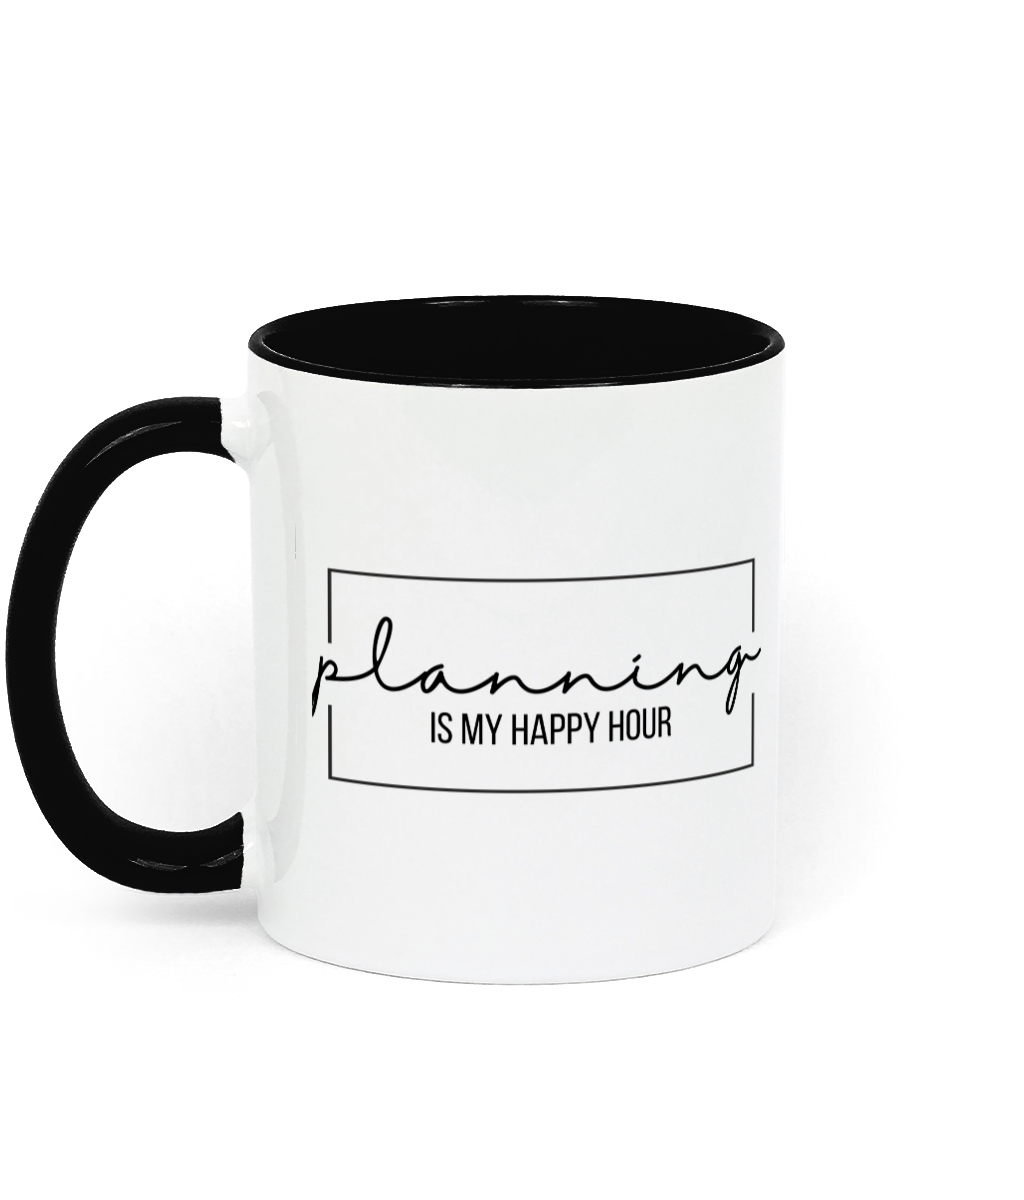 Planning is My Happy Hour 11 oz mug. Planning, Organisation, Productivity, Motivation, Inspiration, Empowering. Perfect Gift. Two-Toned. Black.